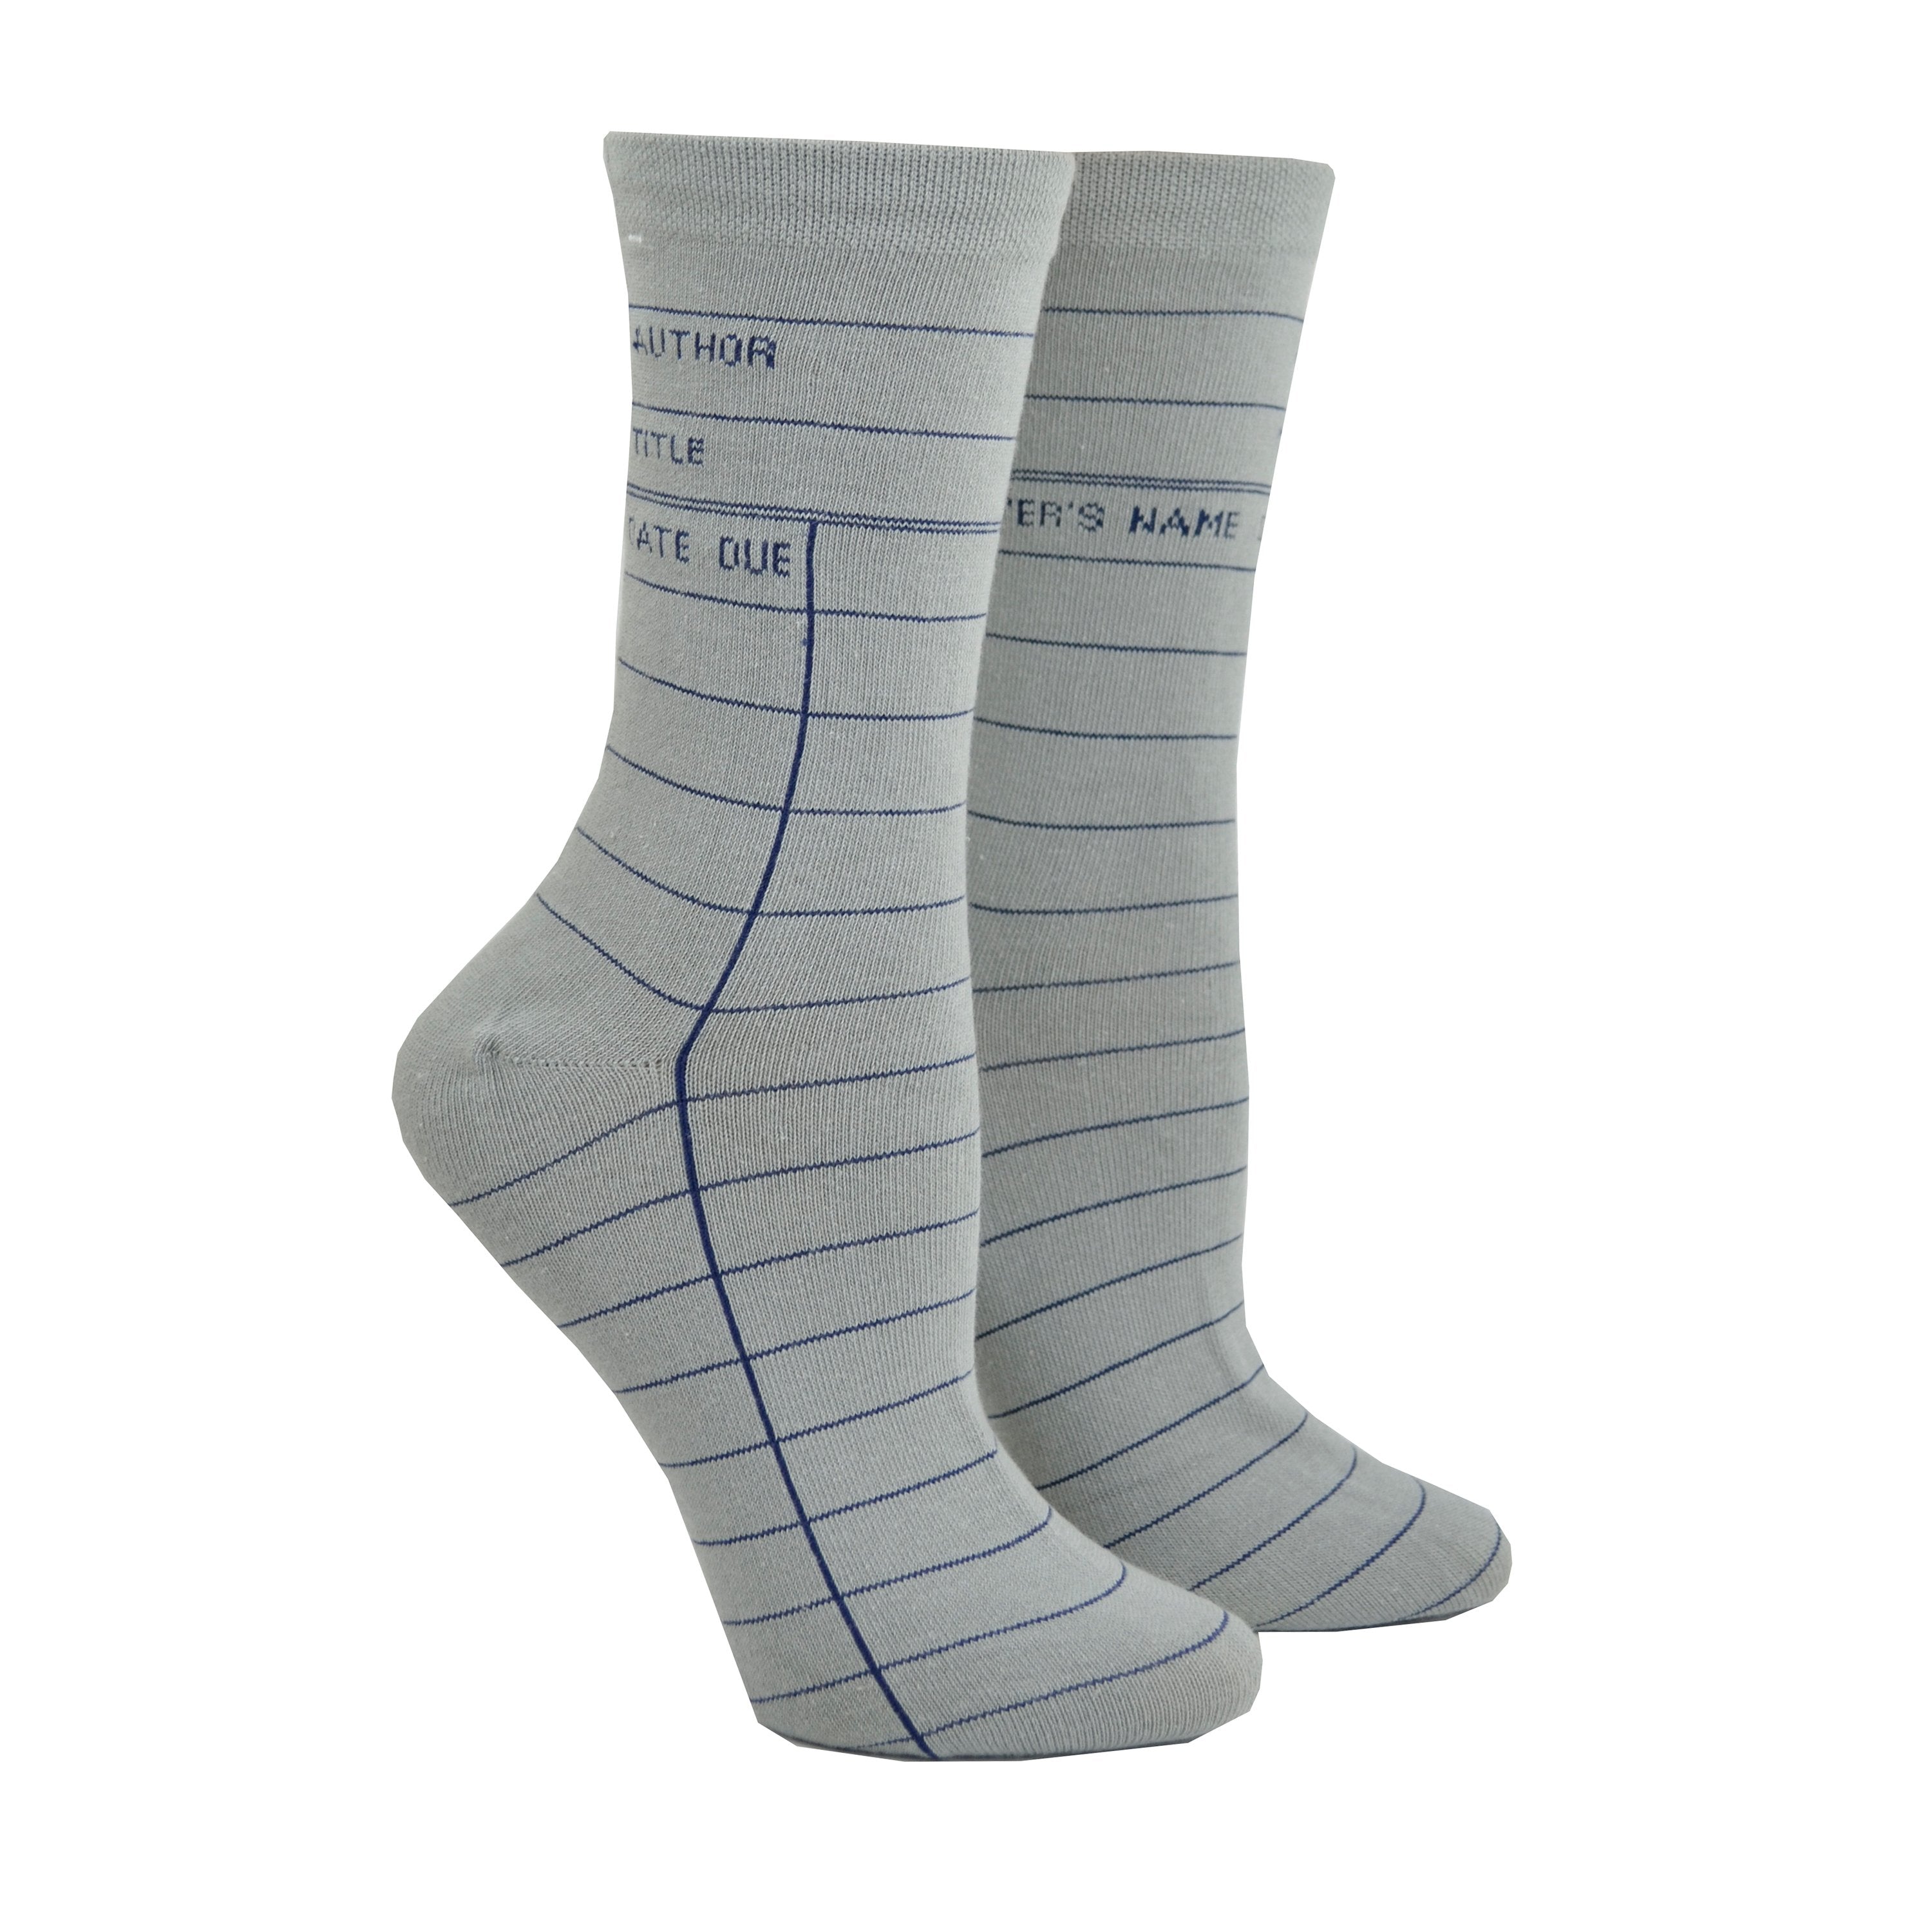 Shown on a leg form in the women's size, these gray cotton unisex crew socks by the brand Out of Print feature the iconic library card design with the words 